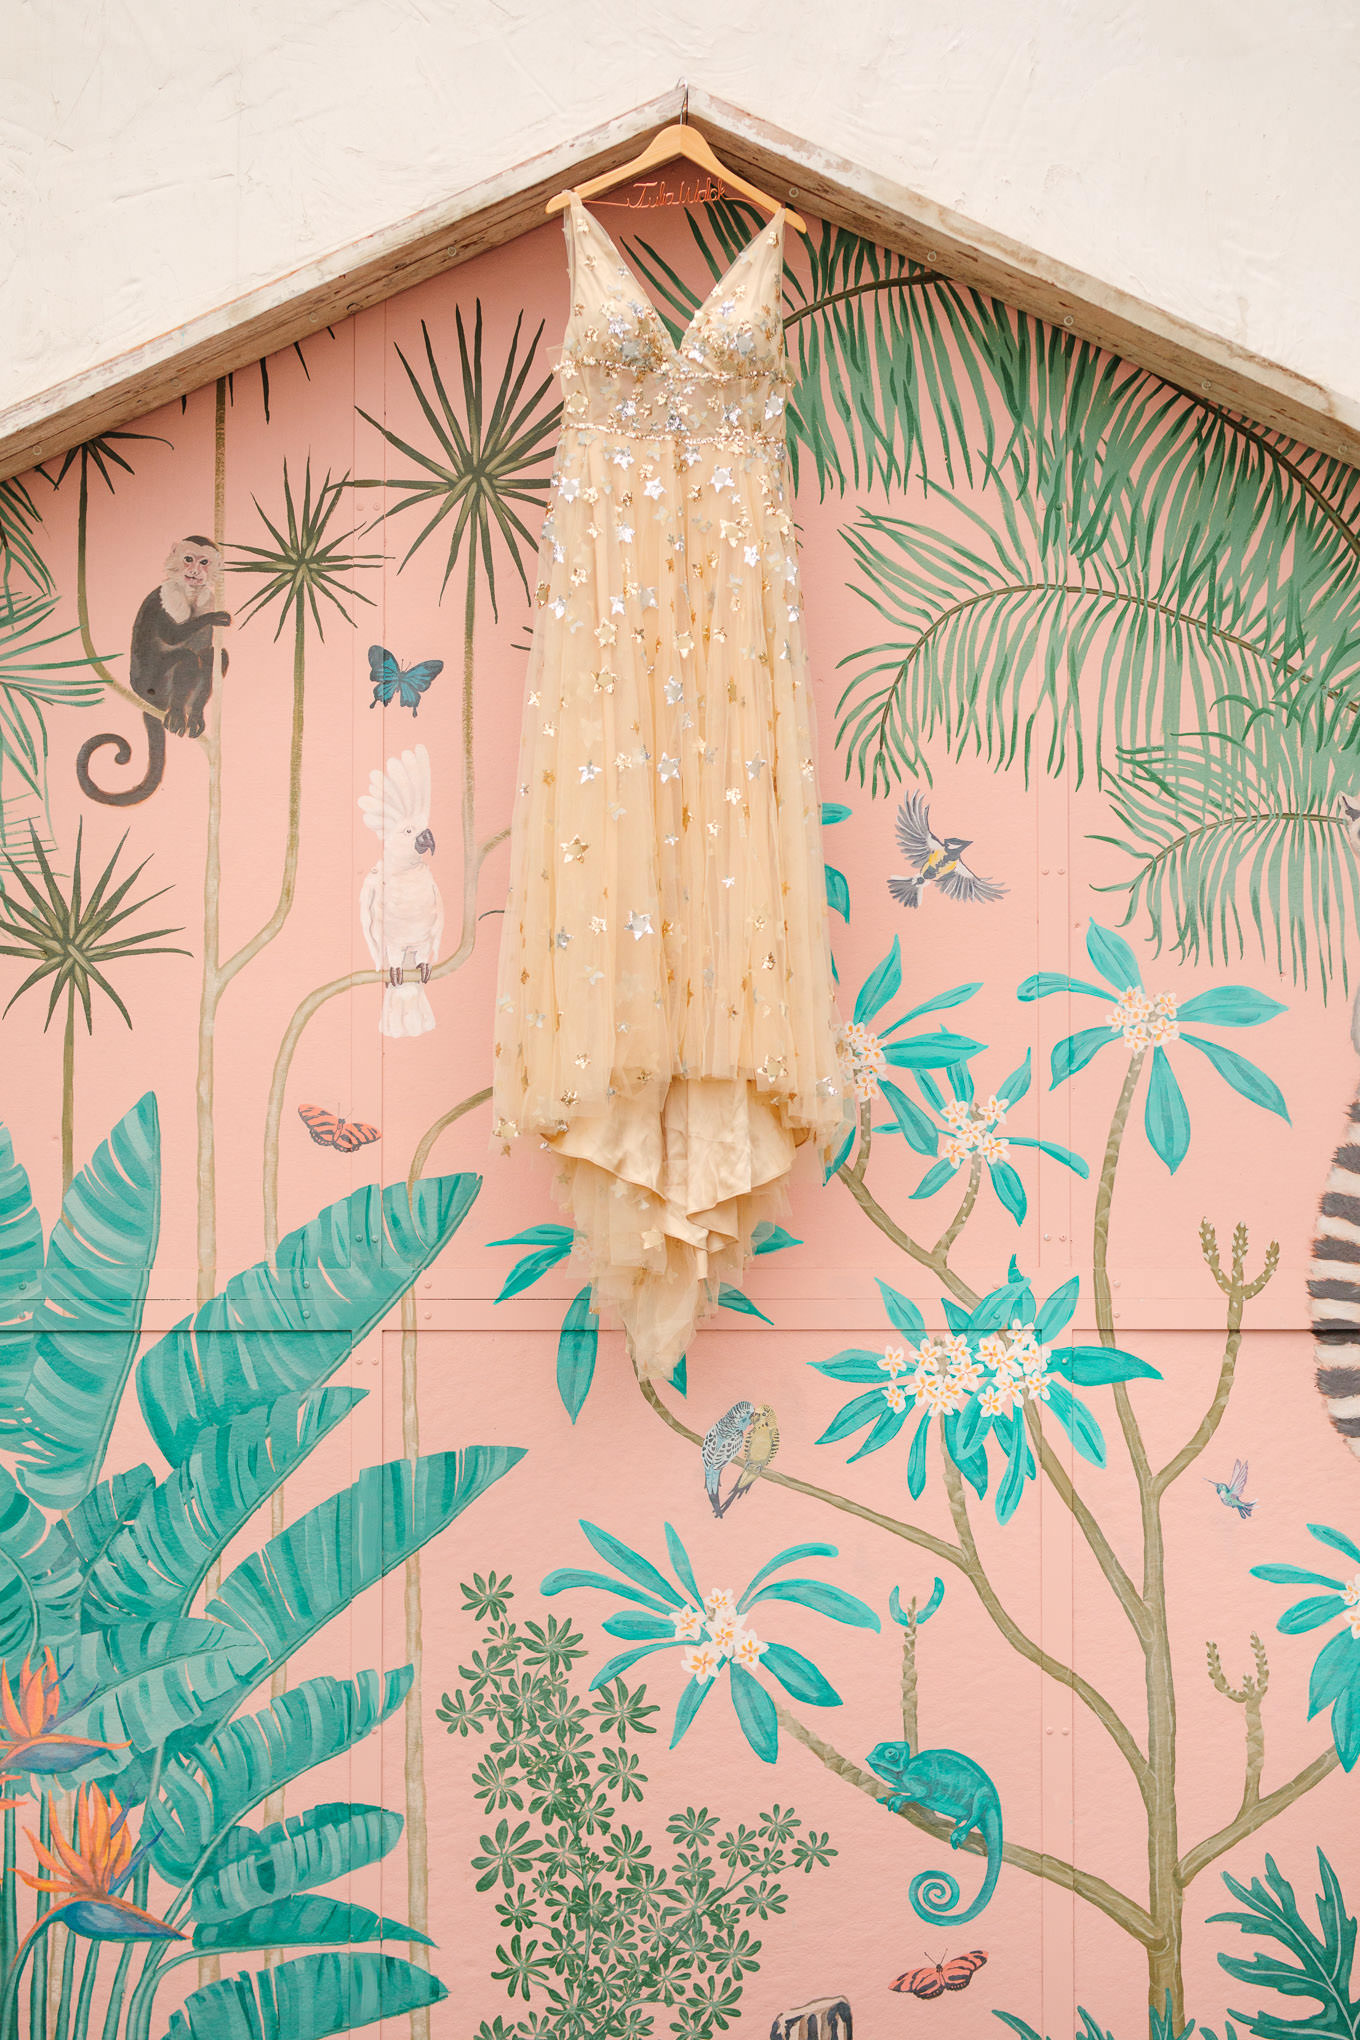 Orion Willowby by Watters dress hanging on Valentine mural | Colorful Downtown Los Angeles Valentine Wedding | Los Angeles wedding photographer | #losangeleswedding #colorfulwedding #DTLA #valentinedtla   Source: Mary Costa Photography | Los Angeles